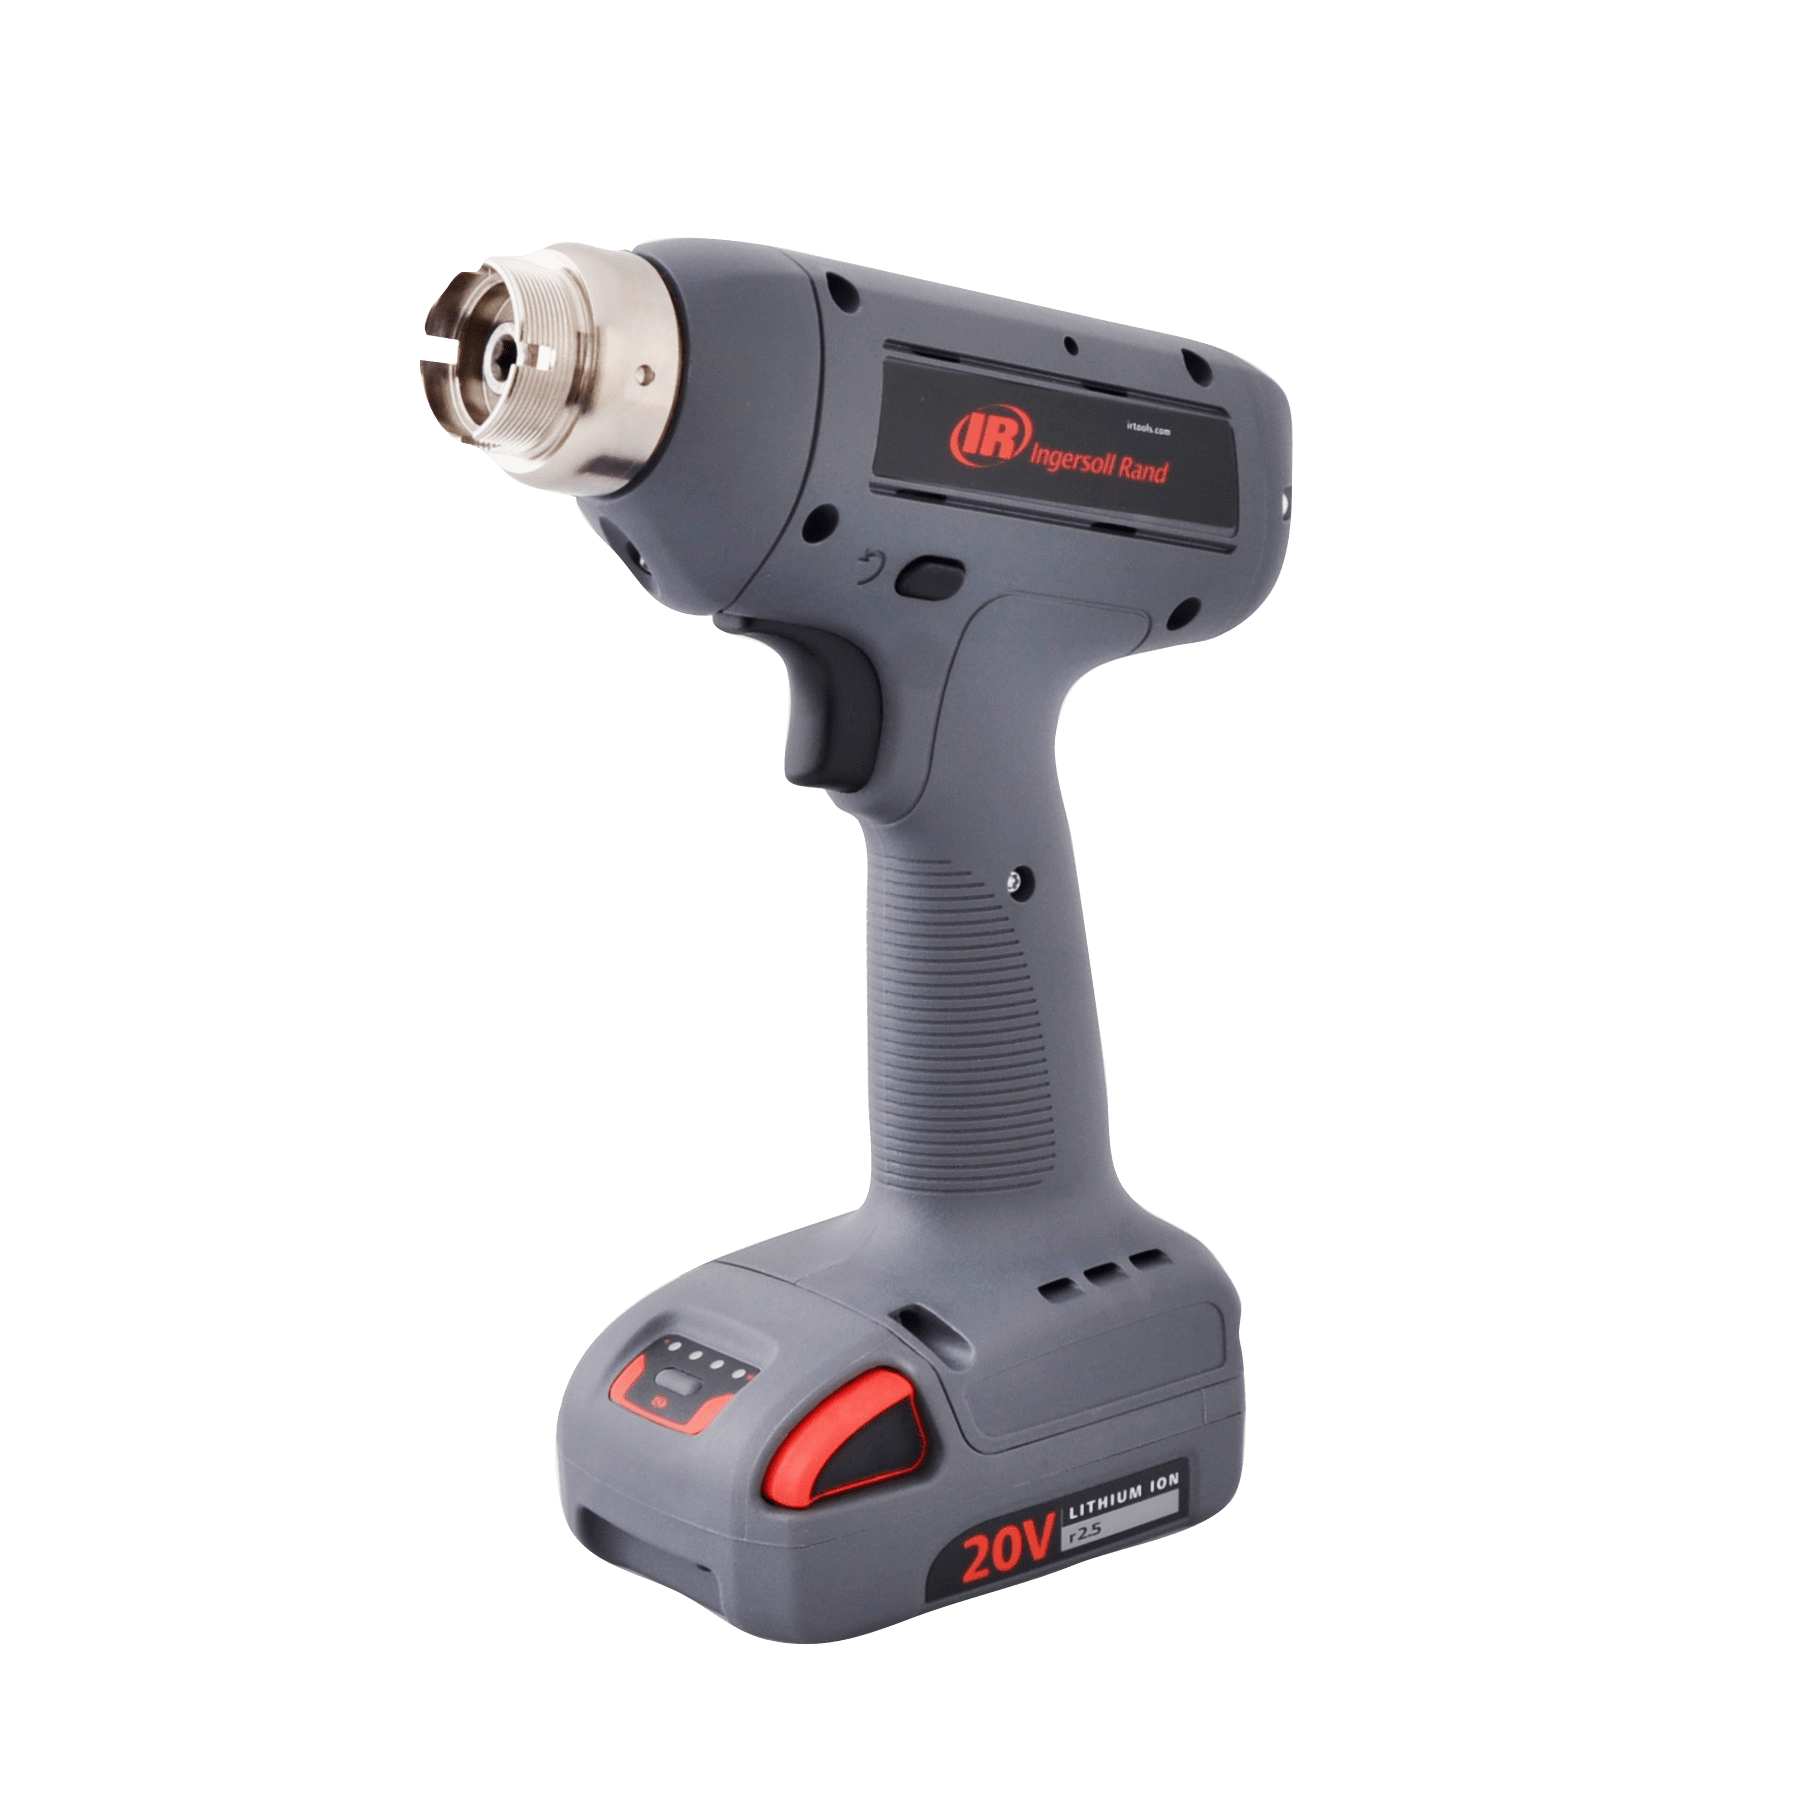 qx-connect-cordless-assembly-tools_feature-text-5